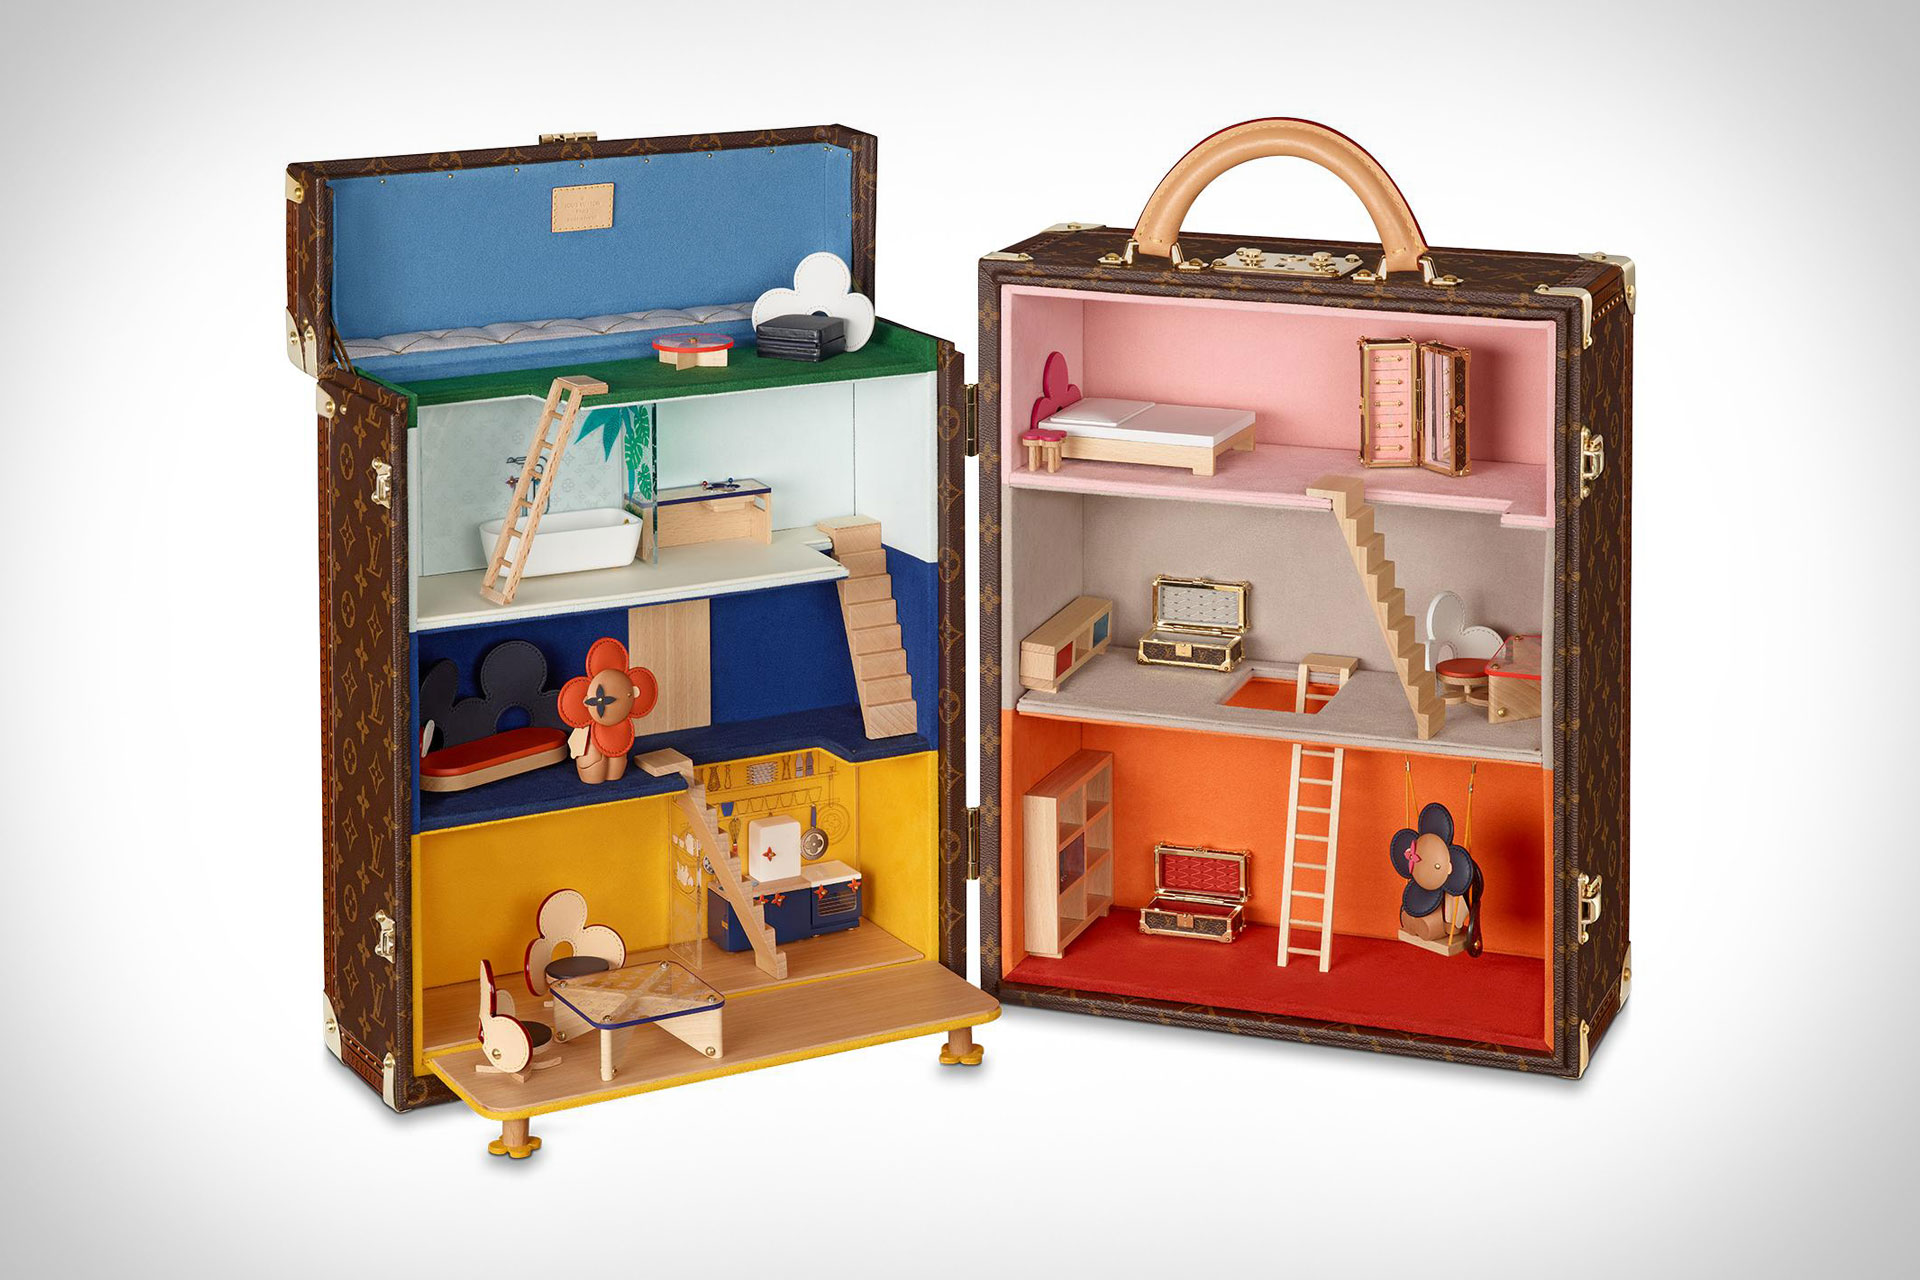 Maison Louis Vuitton Launches a Collection of Wooden Toys and Games